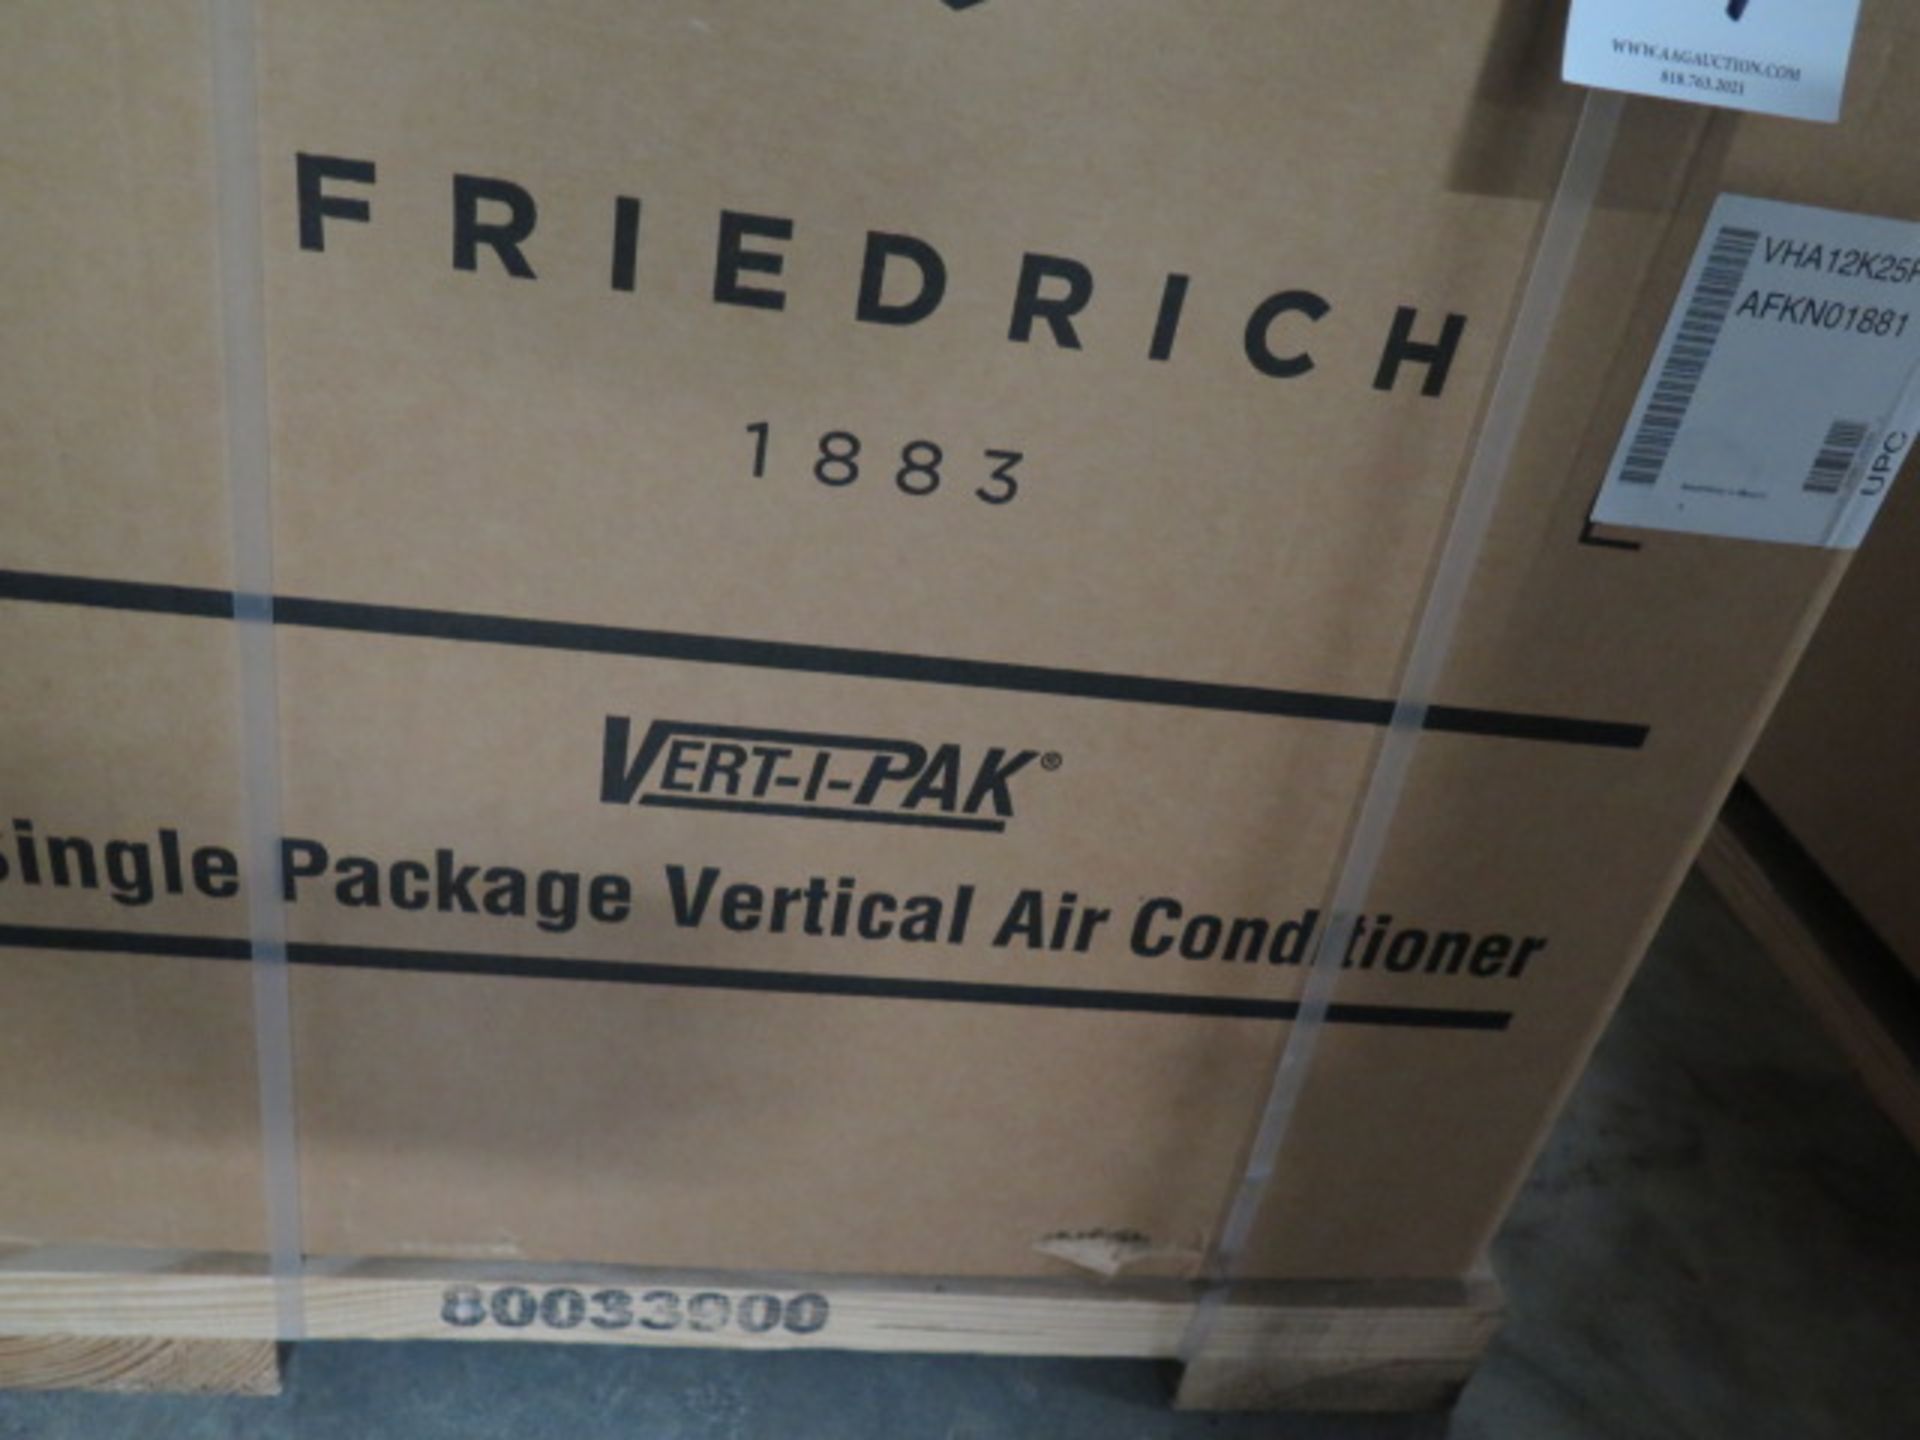 Friedrich VHA12K25RTN Hotel Style 1 Ton Single Package Vertical Air Conditioner s/n AFKN01881 w/ 9, - Image 3 of 4